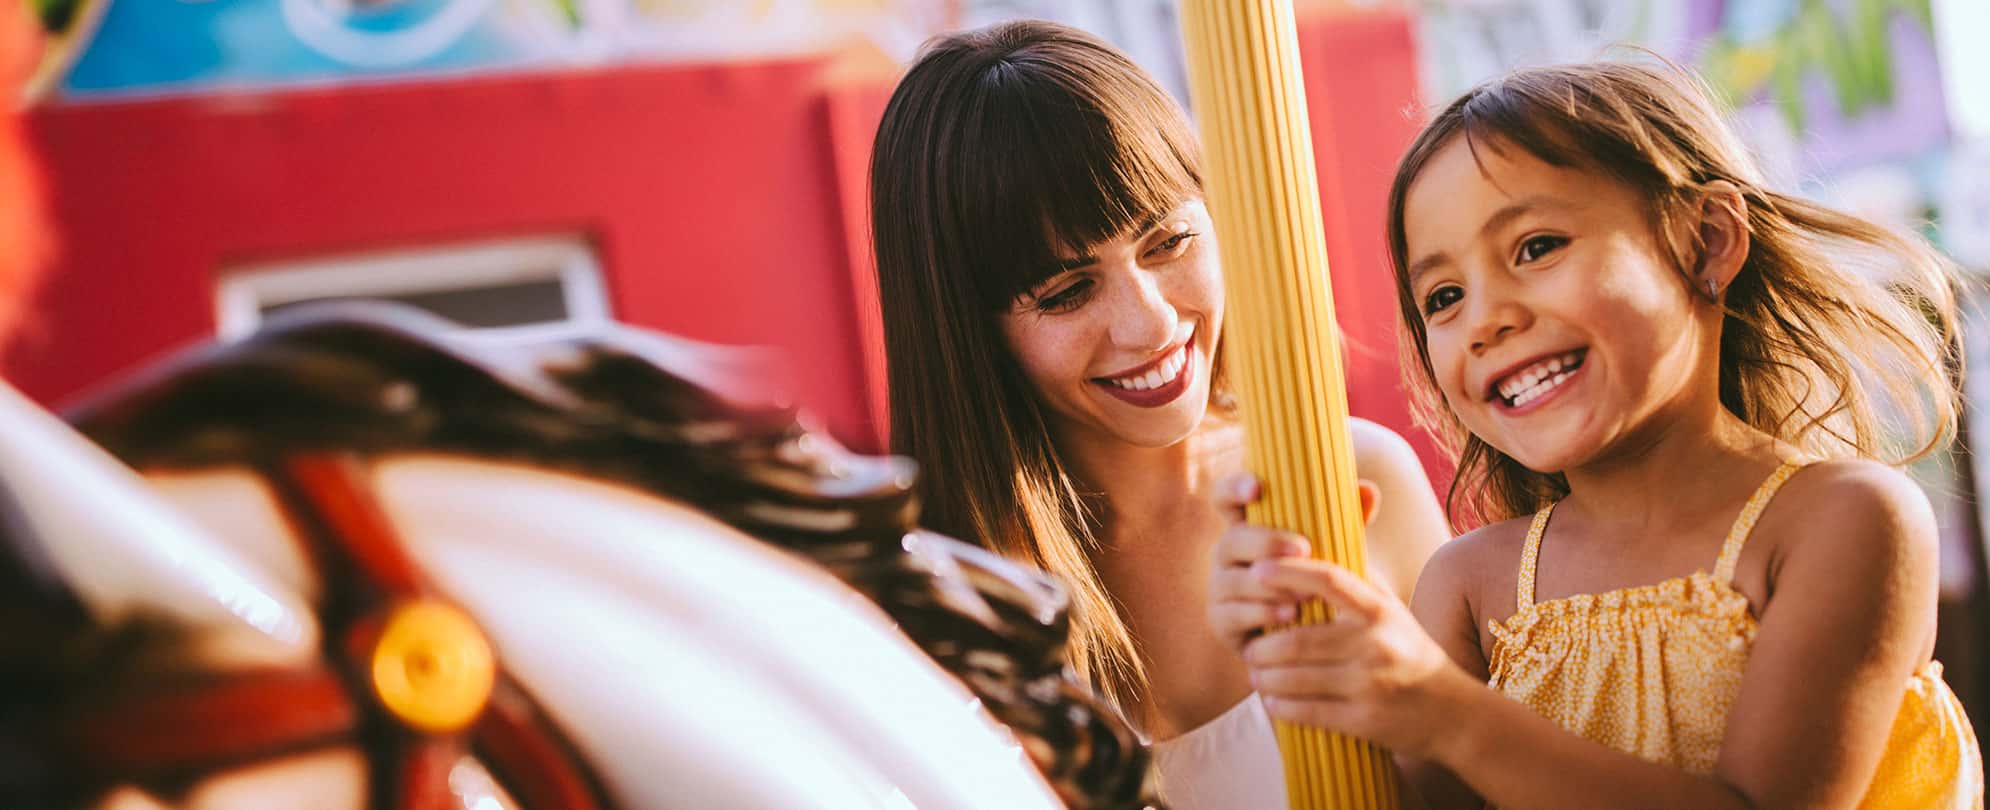 A young girl and her mom smile while riding a merry-go-round in Orlando